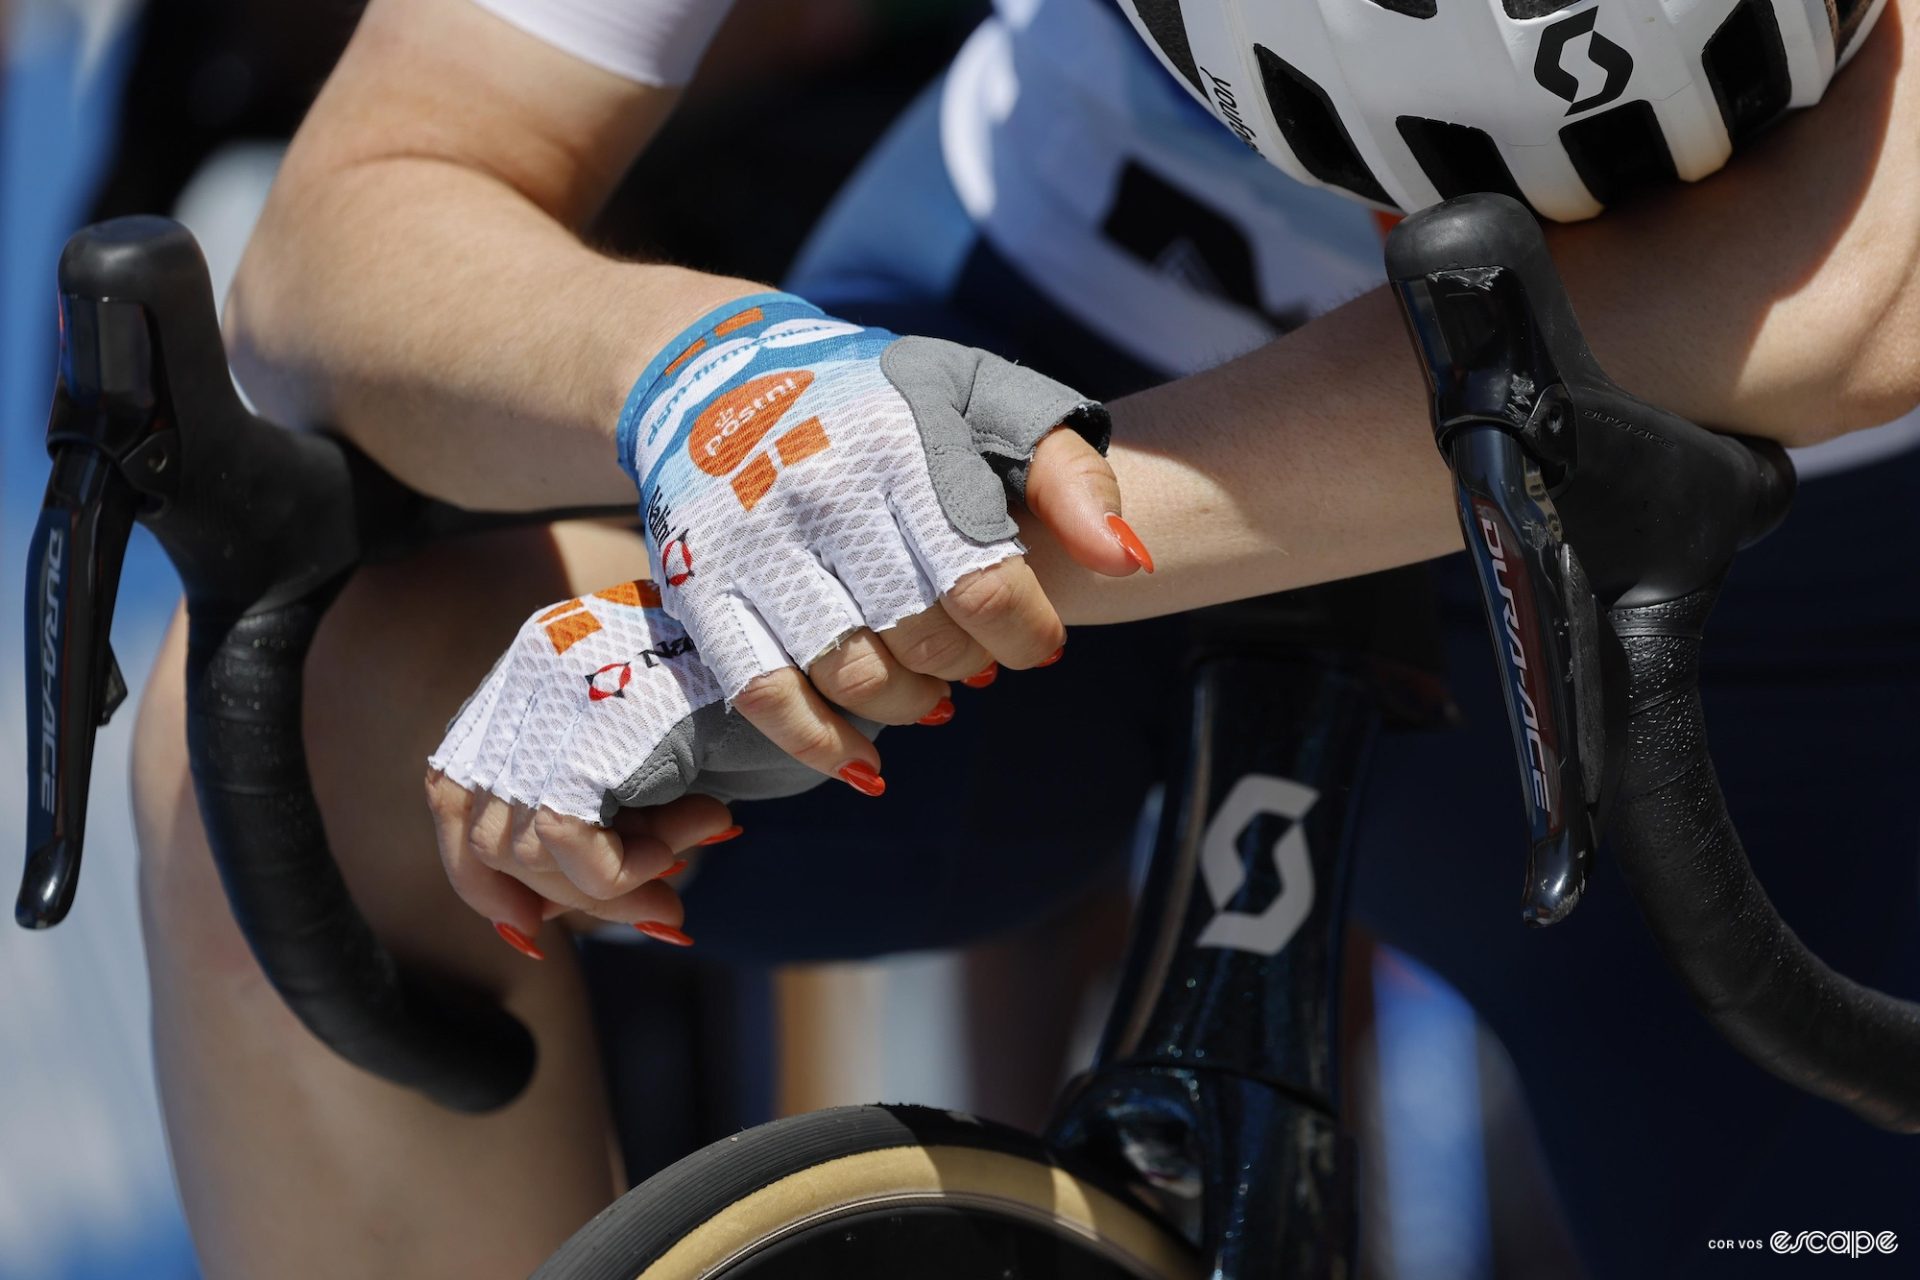 Francesca Barale bends over her handlebars after the third stage of the Tour Down Under with orange nails, the same color as the leader's jersey of the race.